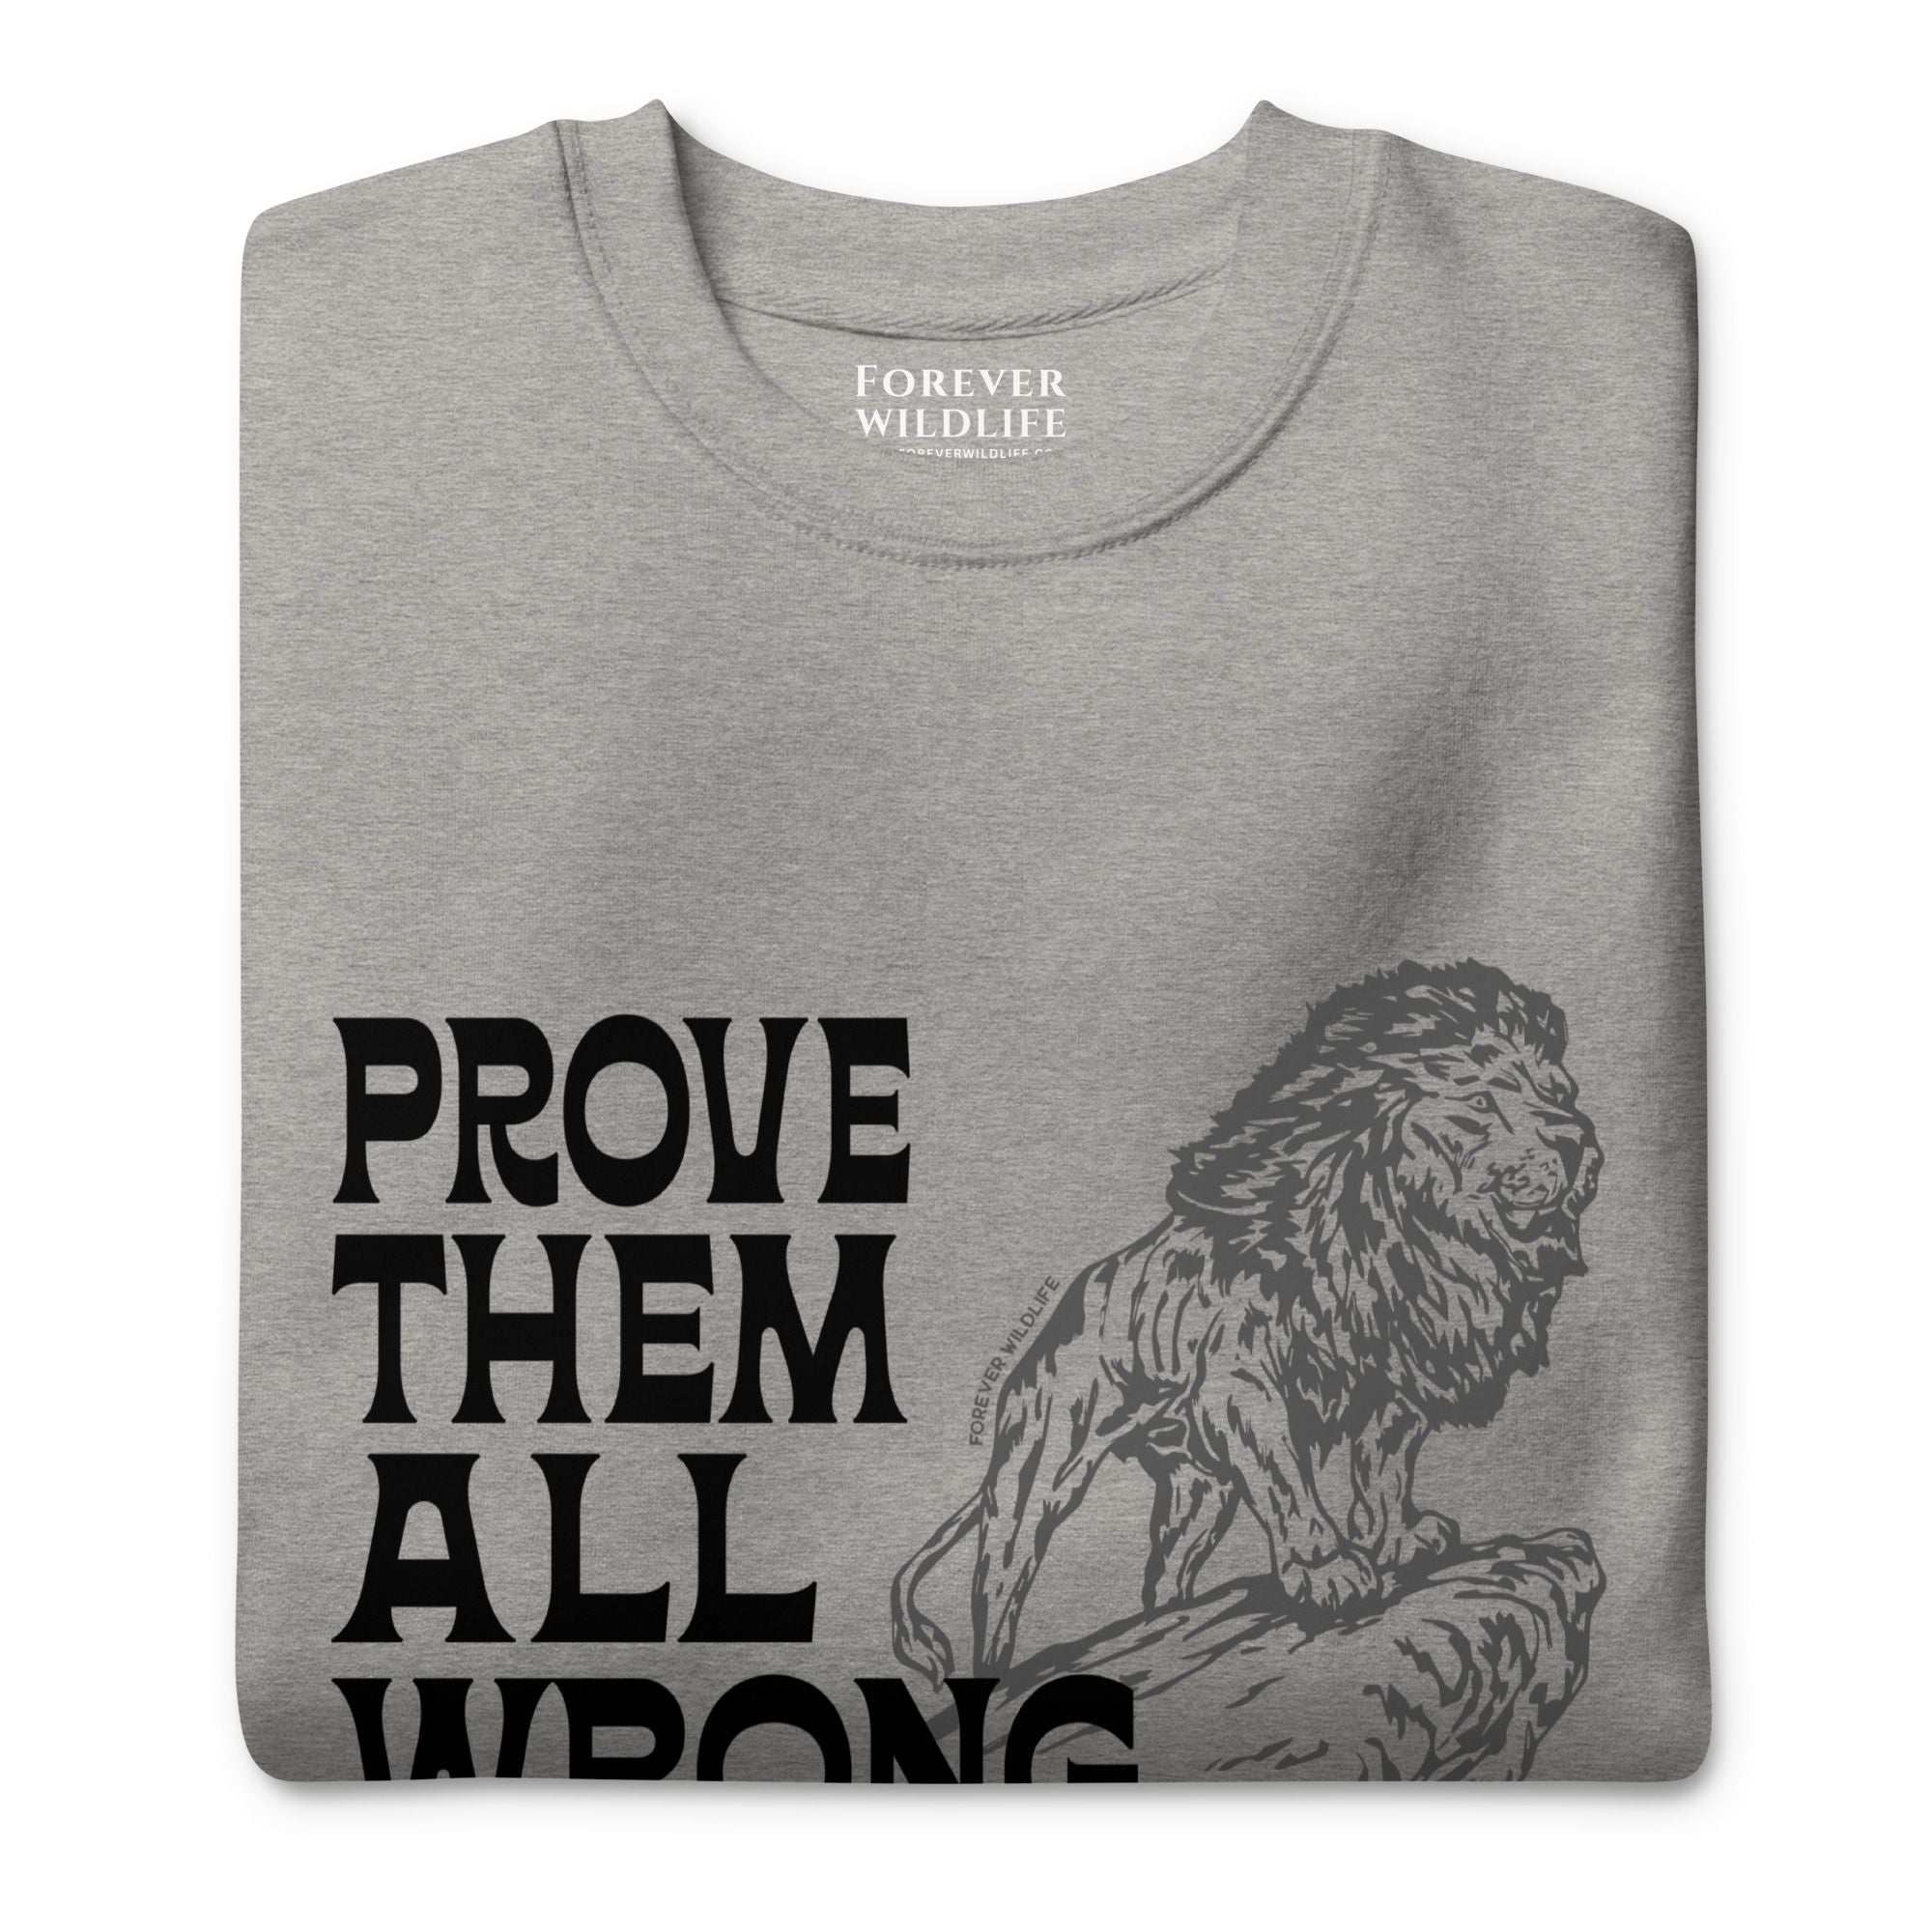 Lion Sweatshirt in Grey-Premium Wildlife Animal Inspiration Sweatshirt Design with 'Prove Them All Wrong About You' text, part of Wildlife Sweatshirts & Clothing from Forever Wildlife.